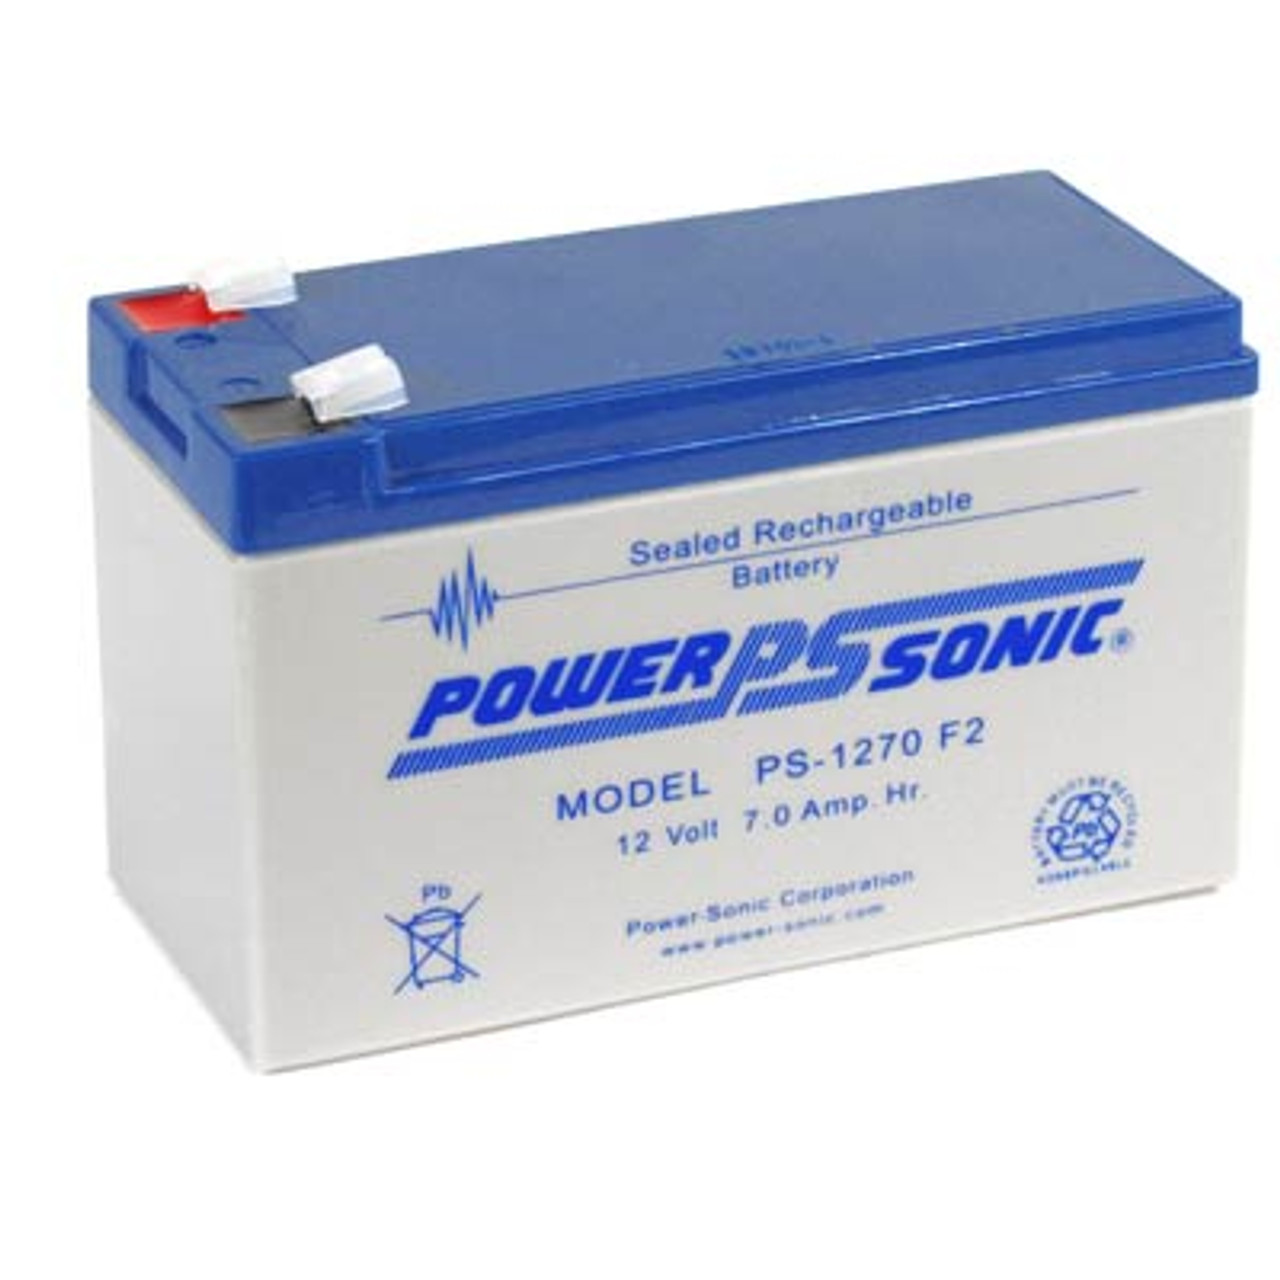 PS-1270 F2 - Powersonic 12V - 7Ah SLA Rechargeable Battery (F2 Spade Connector)